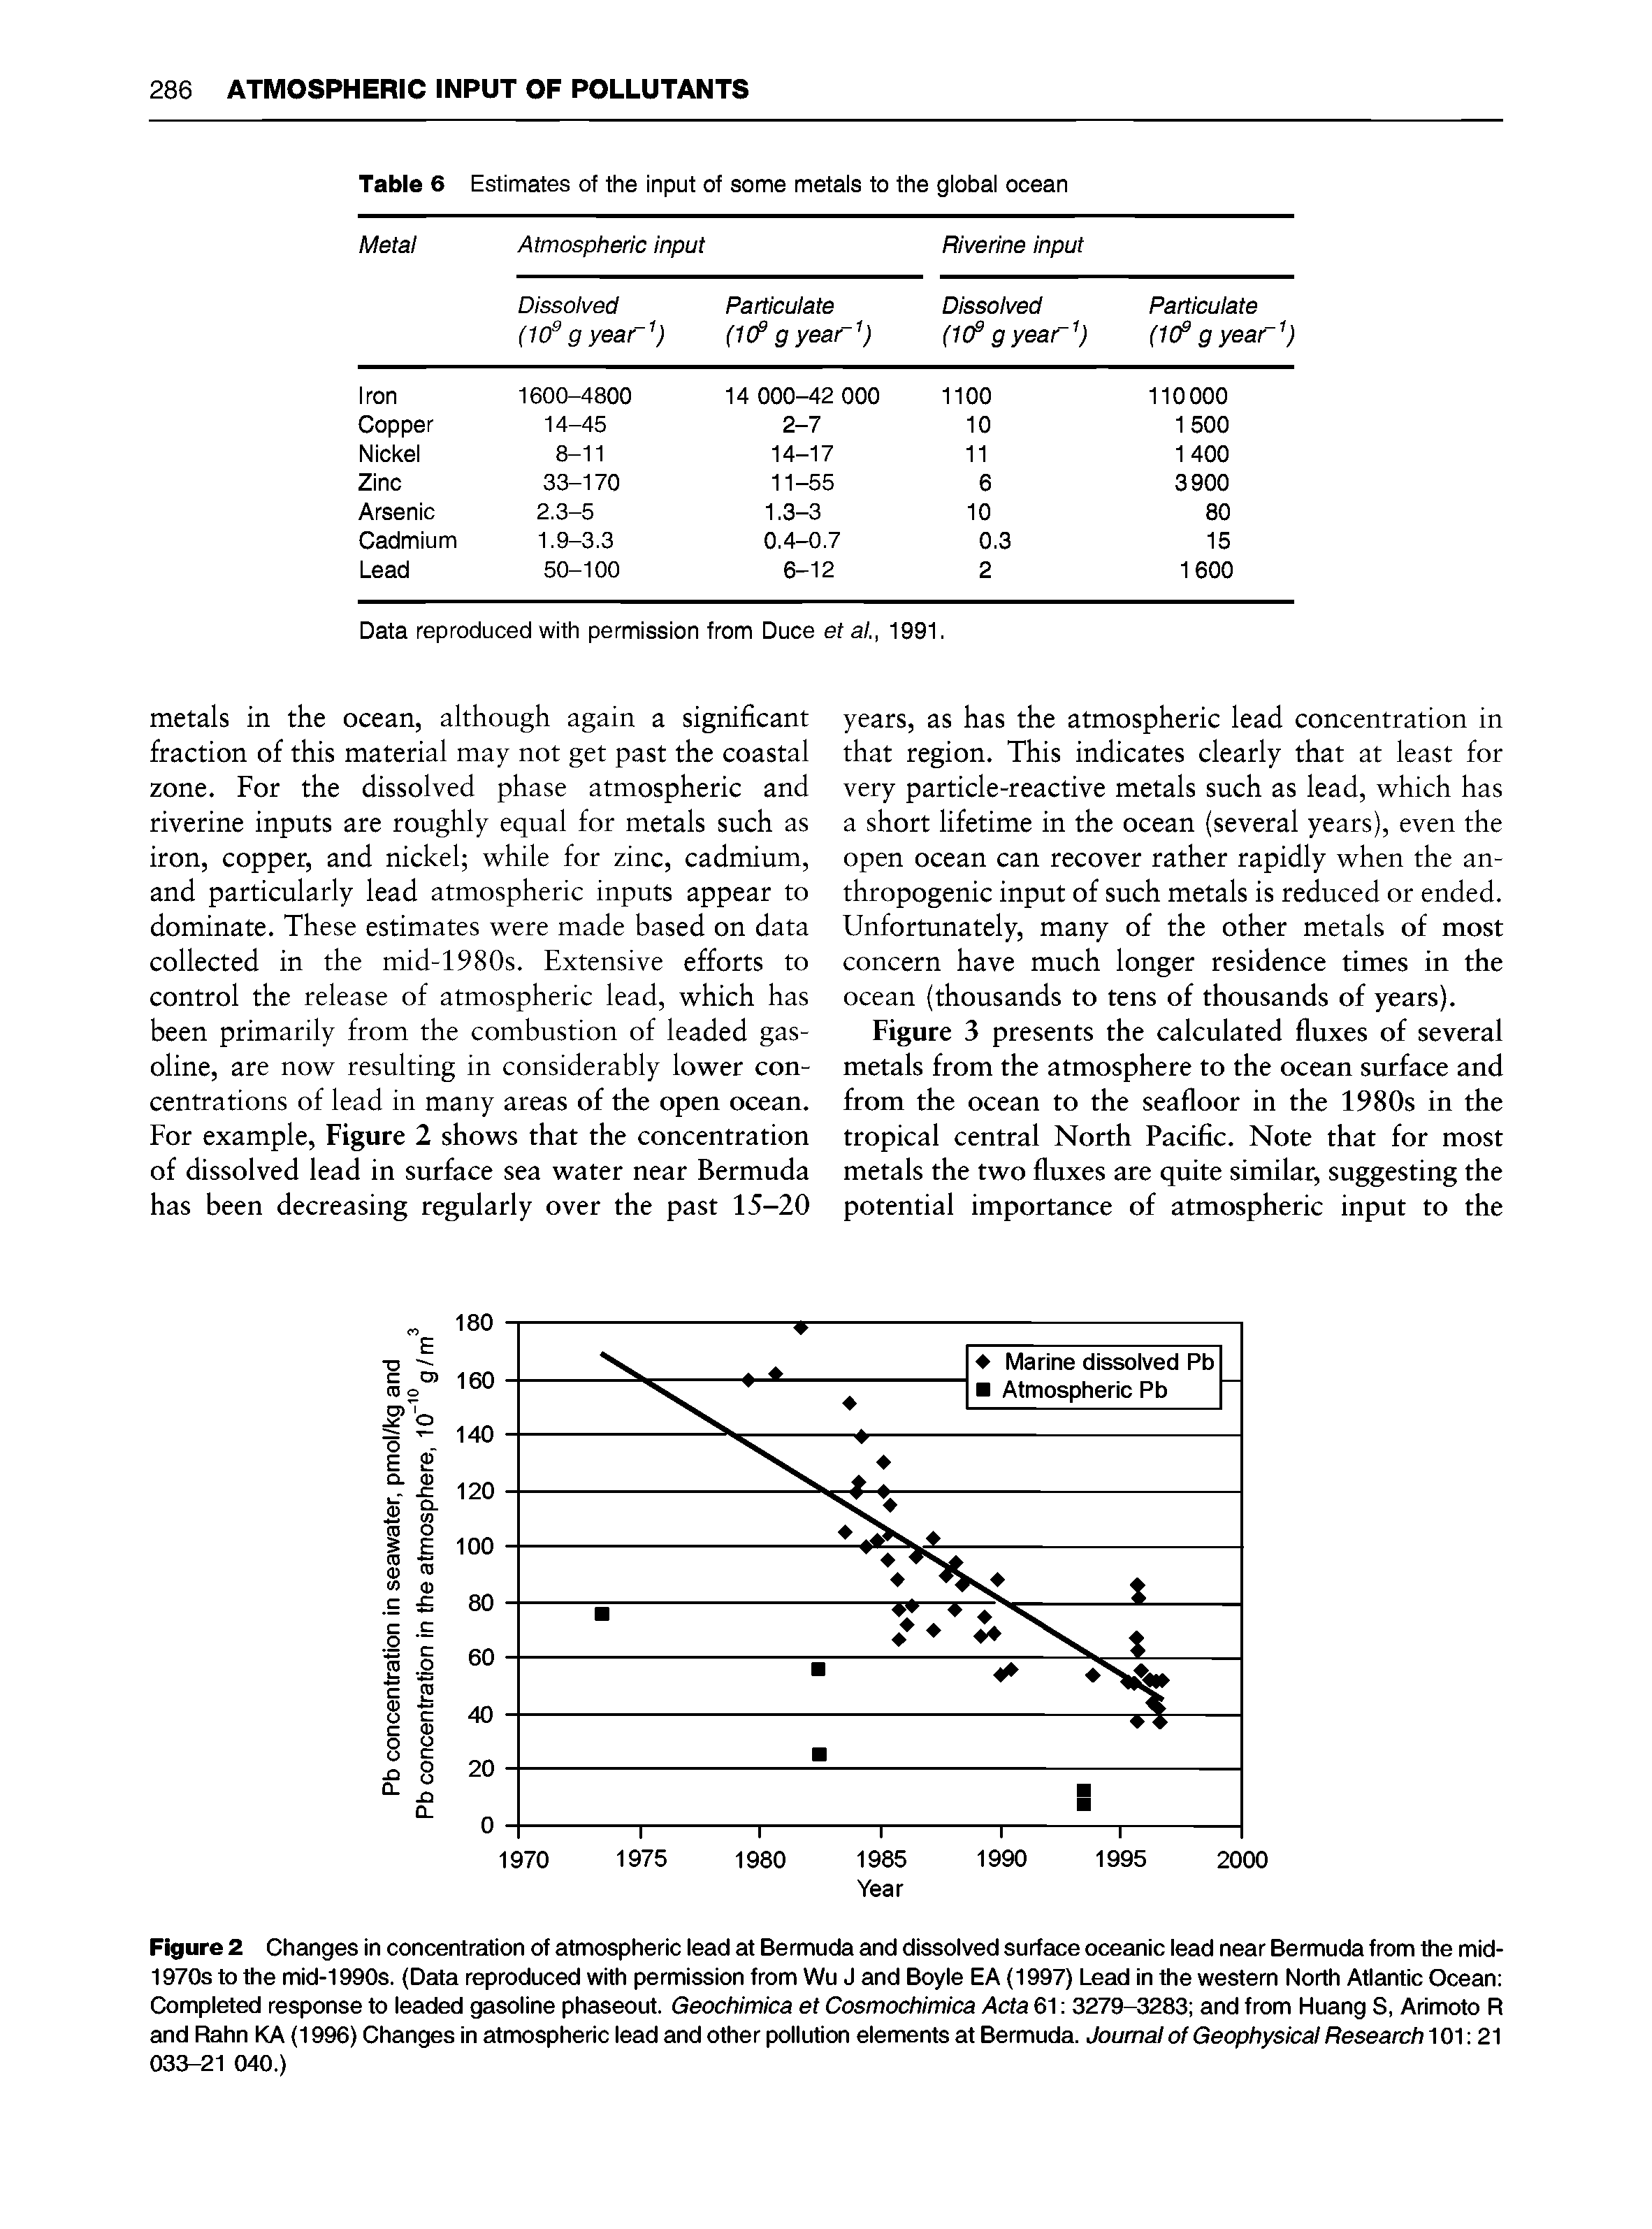 Figure 2 Changes in concentration of atmospheric lead at Bermuda and dissolved surface oceanic lead near Bermuda from the mid-1970s to the mid-1990s. (Data reproduced with permission from Wu J and Boyle EA (1997) Lead in the western North Atlantic Ocean Completed response to leaded gasoline phaseout. Geochimica et Cosmochimica Acta 61 3279-3283 and from Huang S, Arimoto R and Rahn KA (1996) Changes in atmospheric lead and other pollution elements at Bermuda. Journal of Geophysical Research 101 21 033-21 040.)...